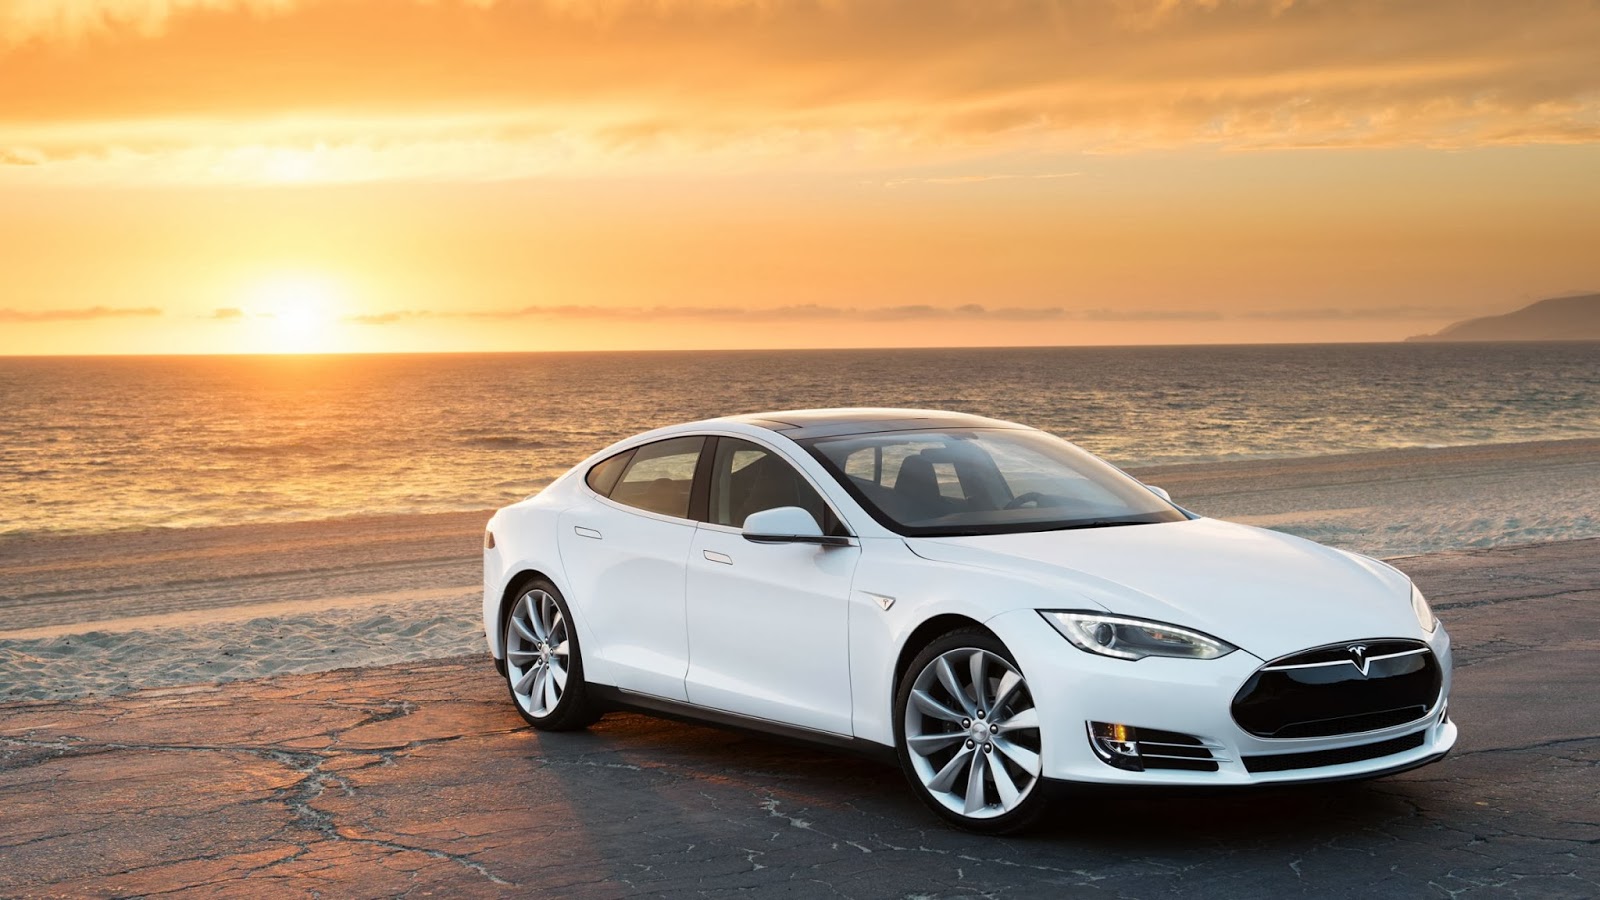 Tesla Model S electric car the most efficient and powerful